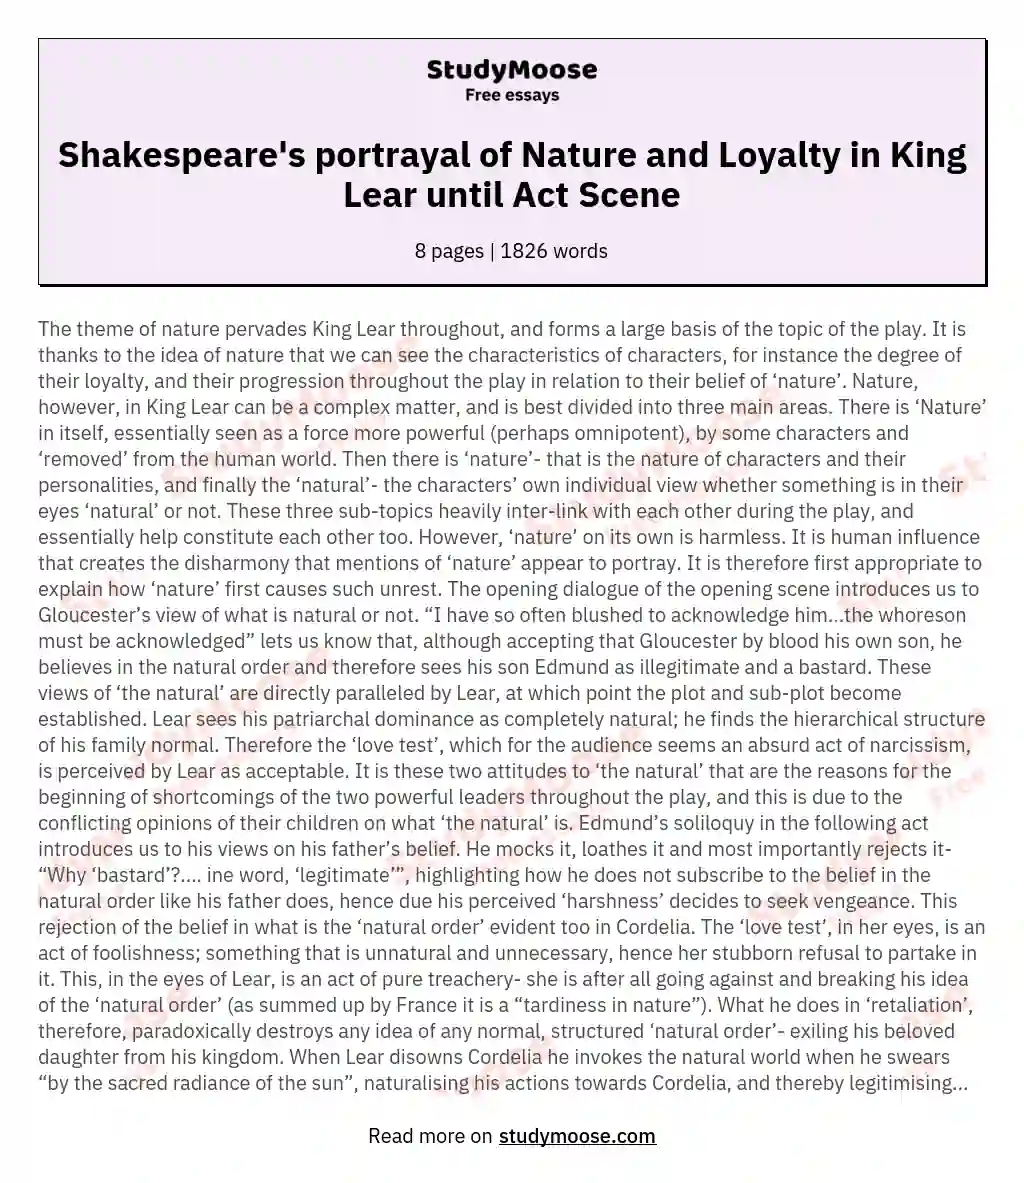 Evaluate Shakespeares portrayal of Nature and loyalty in King Lear up to Act 2 Scene 1?